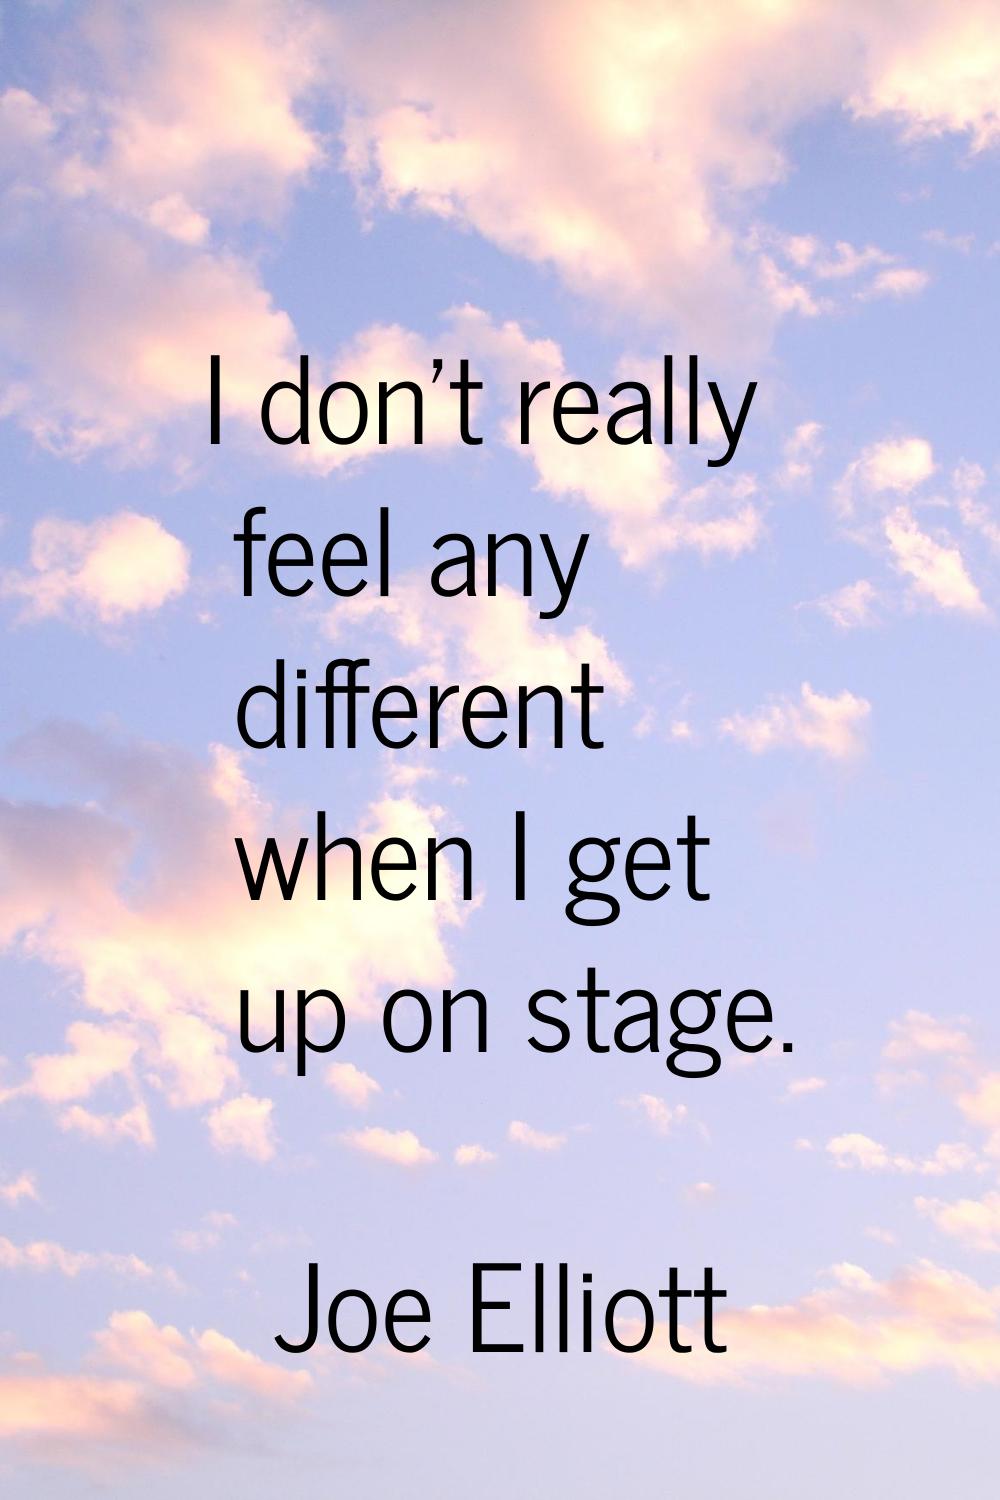 I don't really feel any different when I get up on stage.